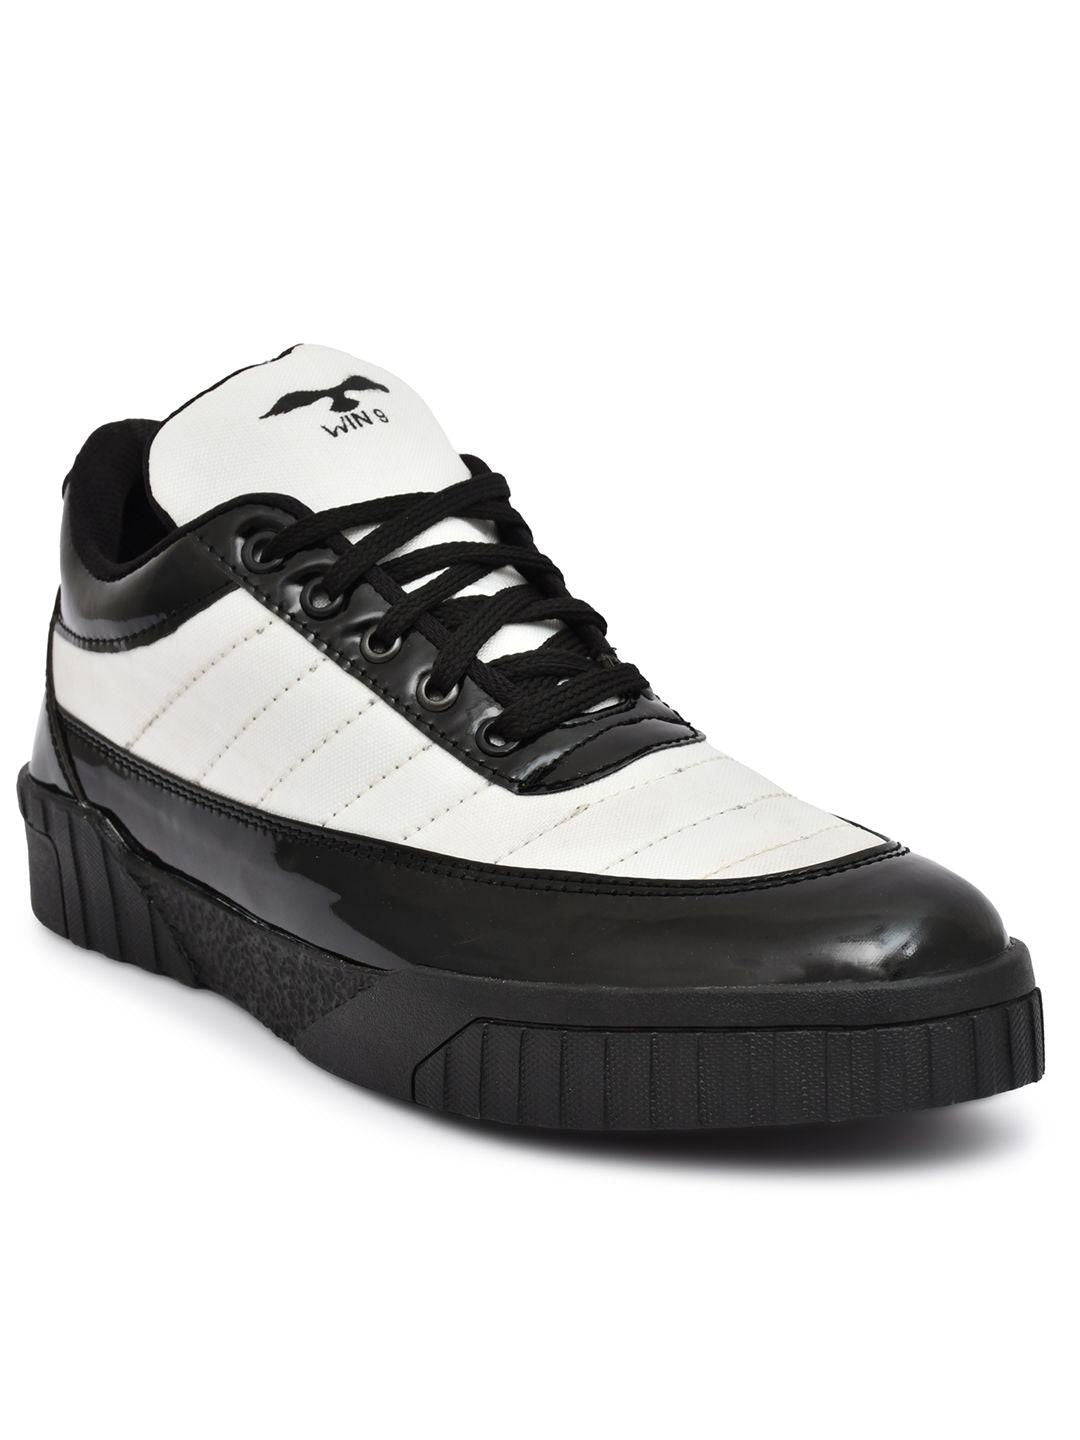 WIN9 Casual Sneakers Black Outdoor Shoes For Boys And Men